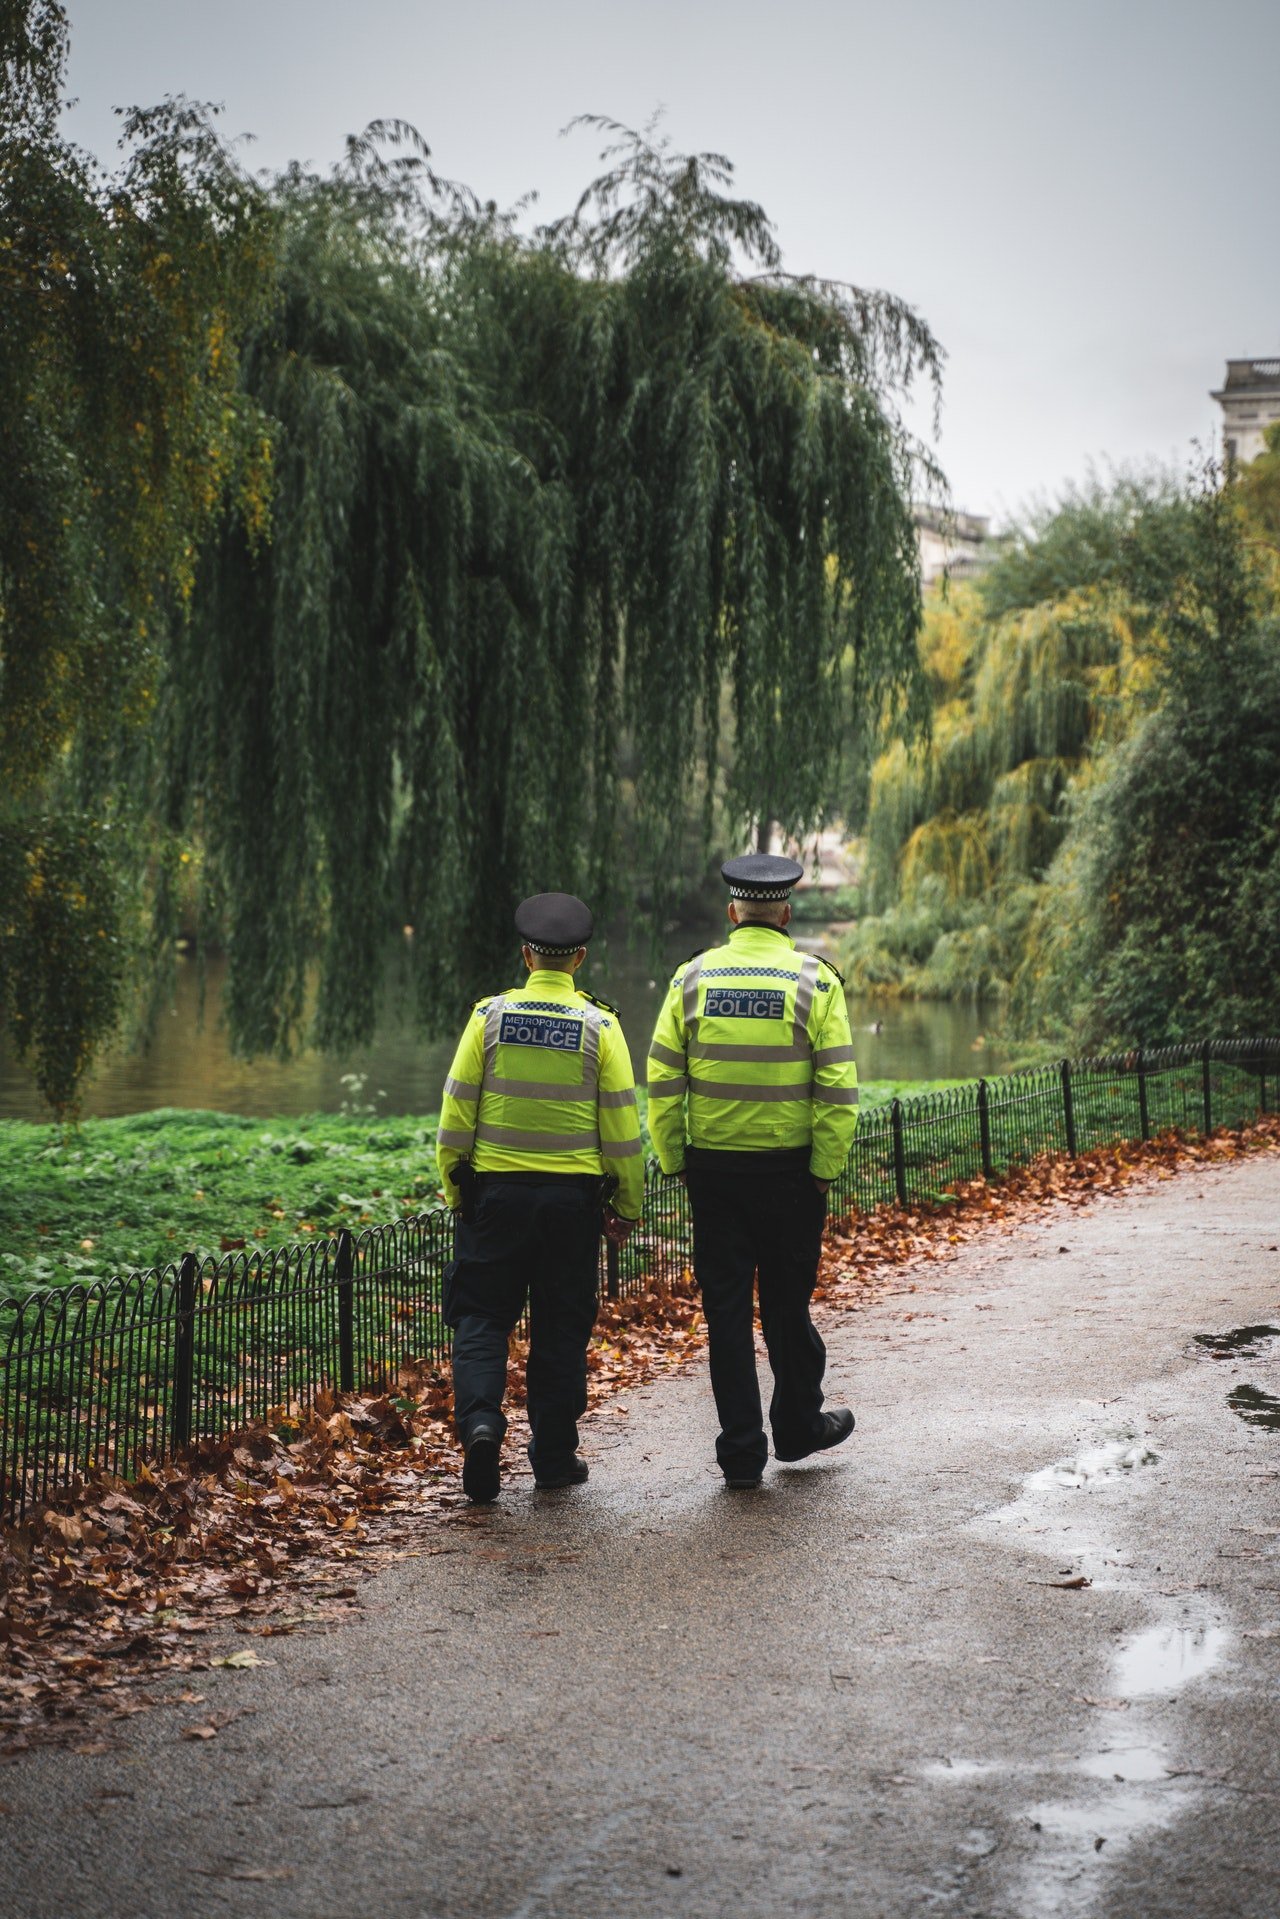 Photo of a fully kitted police officer | Photo: Pexels